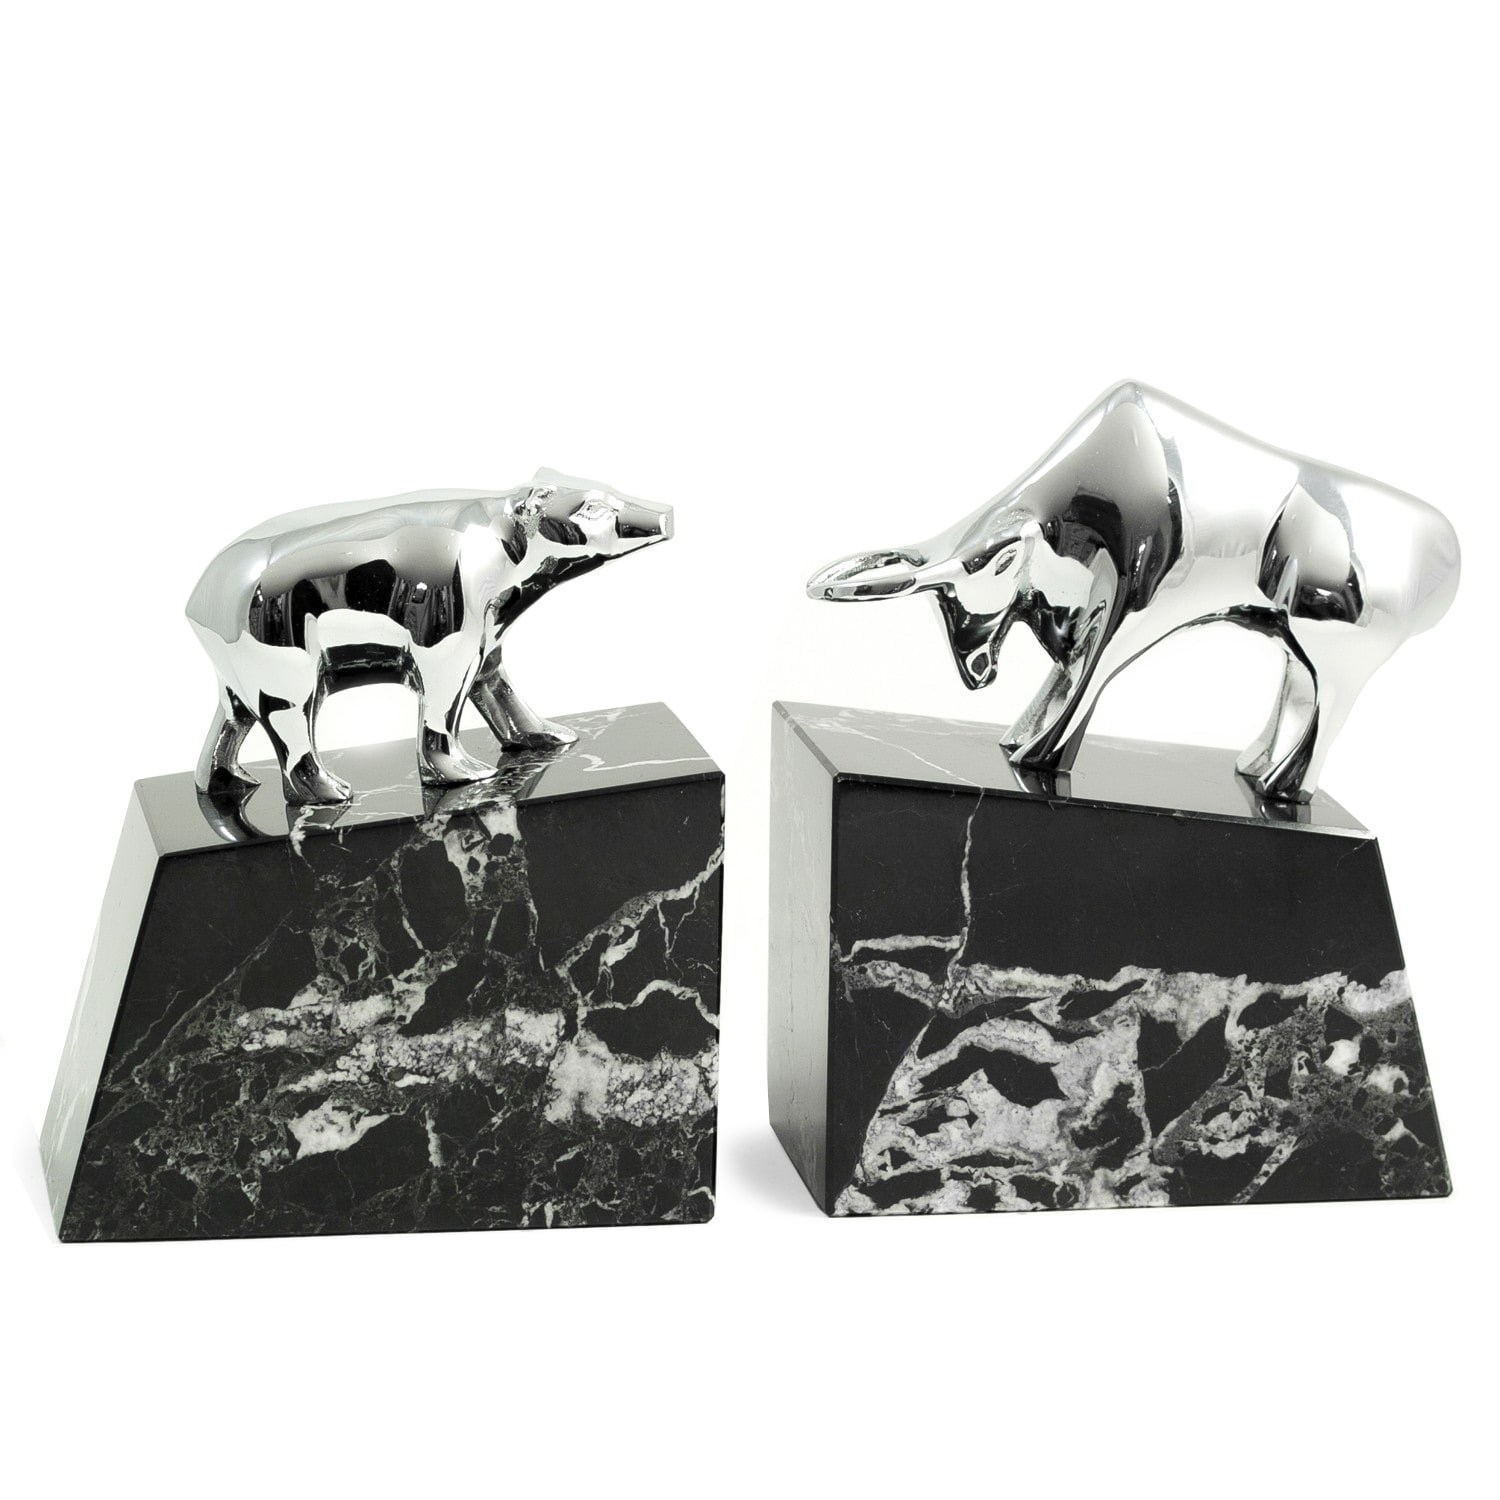 METAL BOOK ENDS "STOCK MARKET" BULL AND BEAR BOOKENDS BOOKENDS 